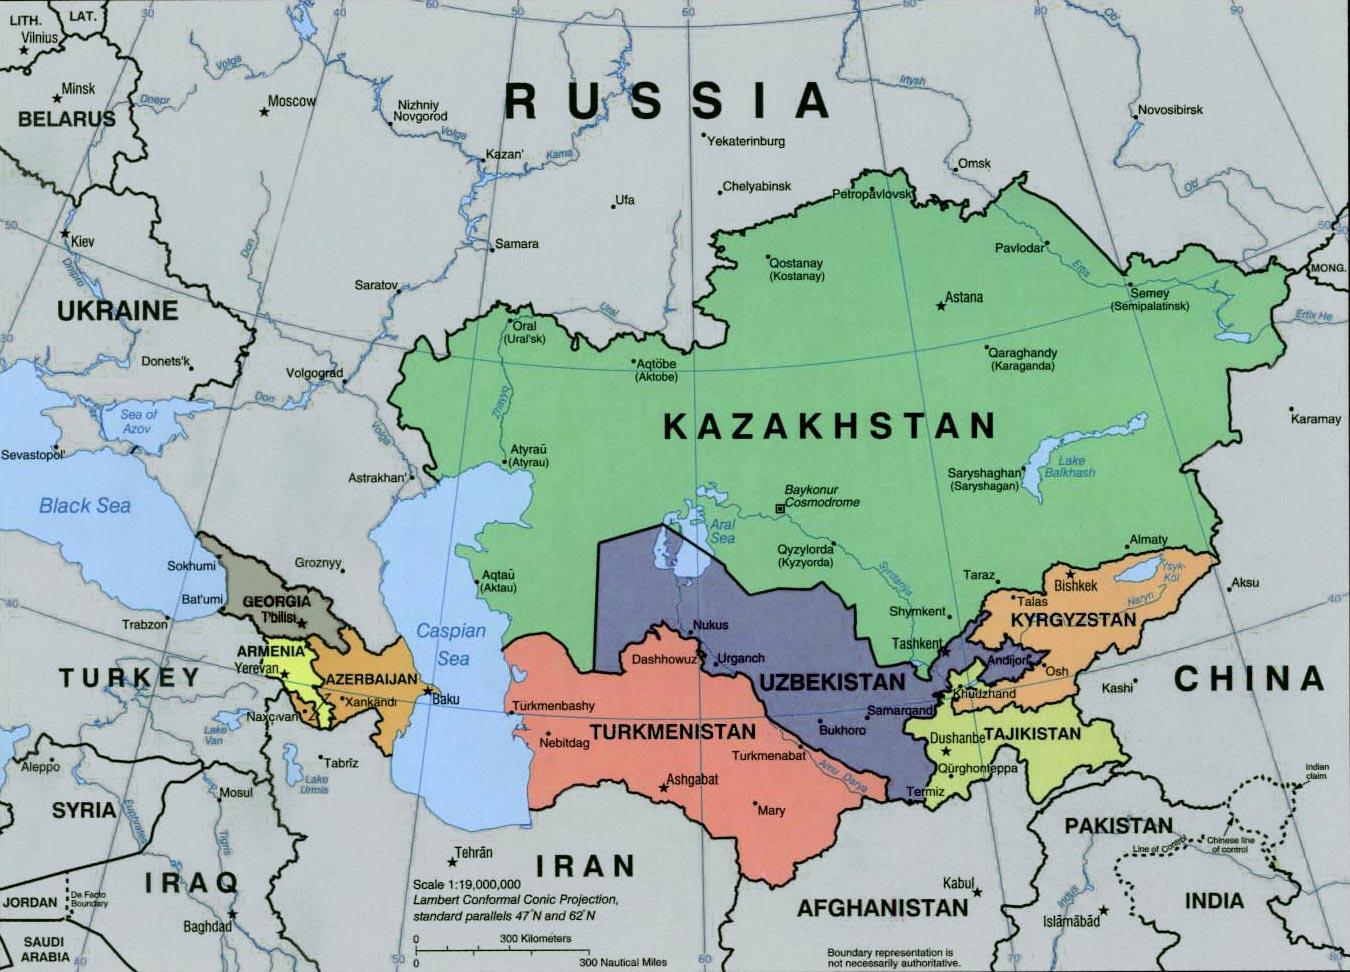 Russia and central asia map - Map of Russia and central asia (Eastern ...